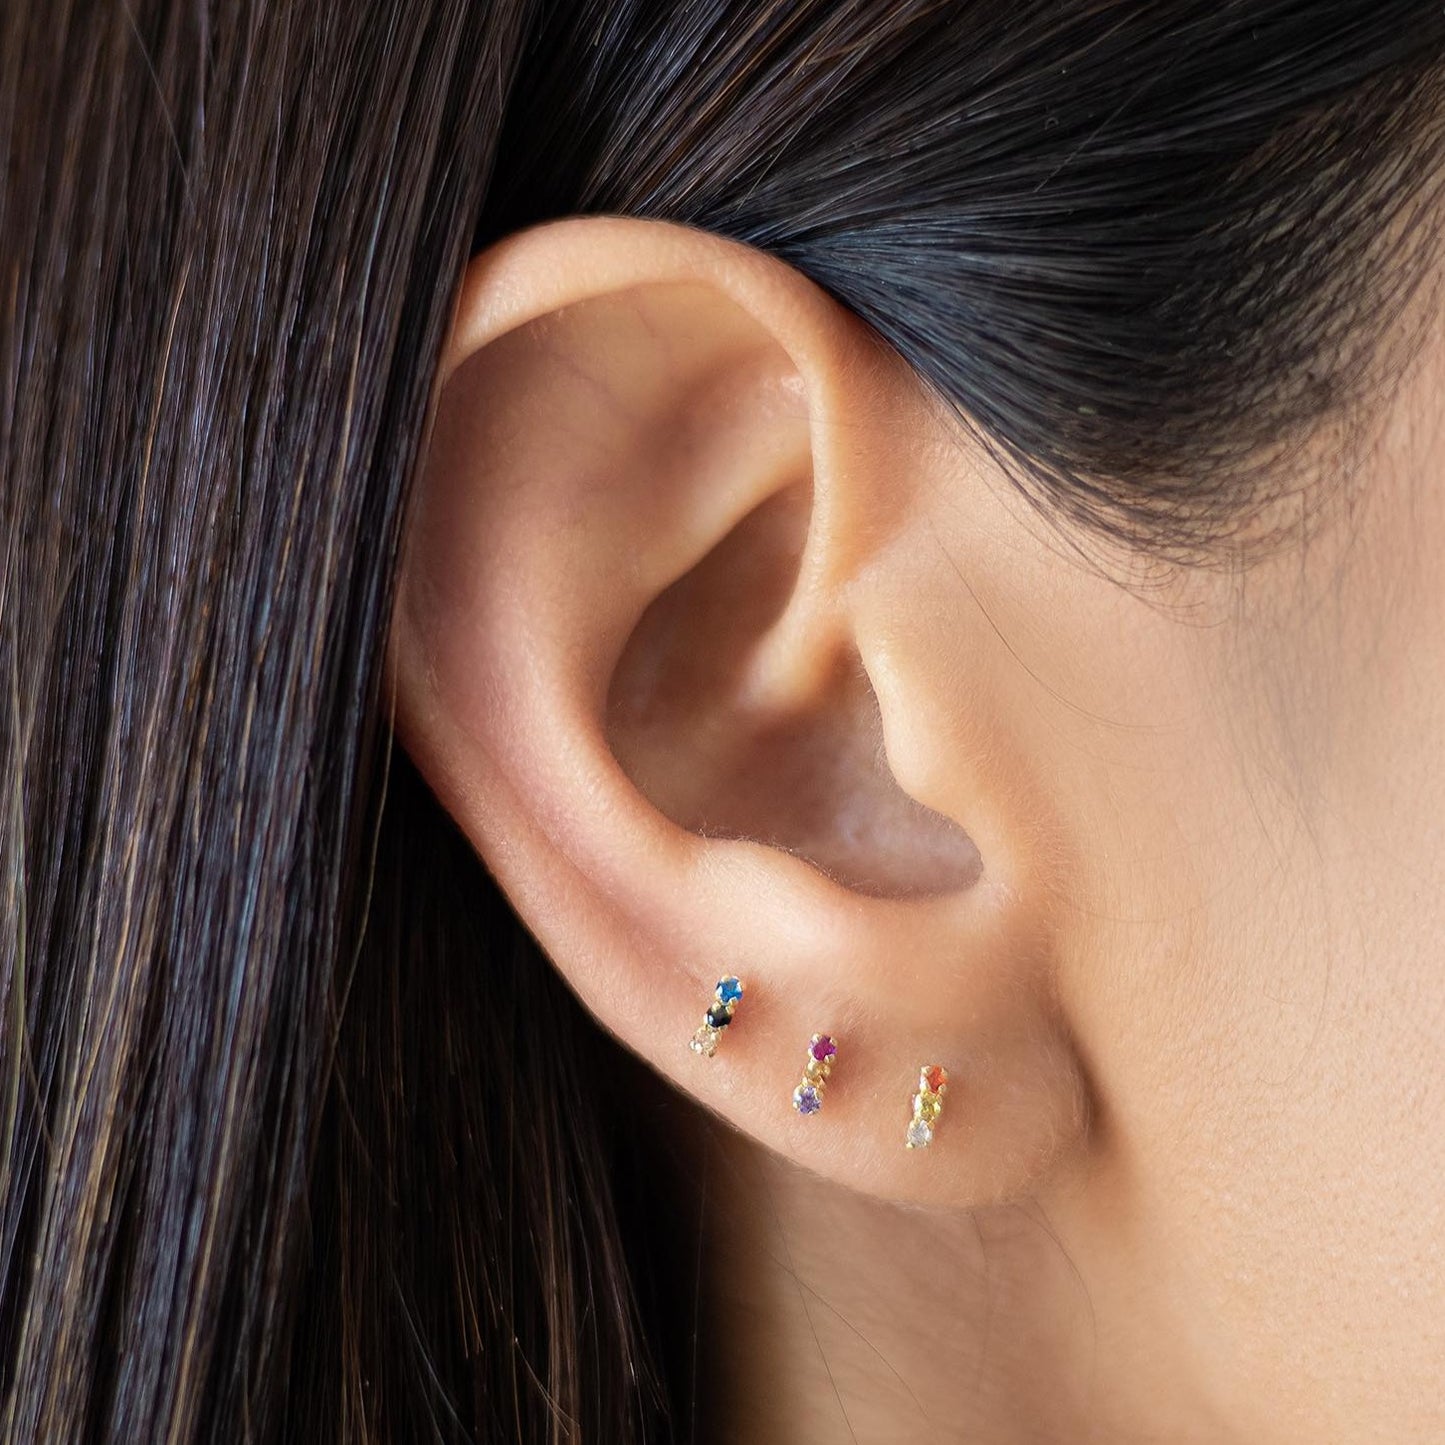 Load image into Gallery viewer, These beautiful 10K gold line earrings are perfect for everyday wear and make the perfect gift for any occasion. These earrings are lightweight, wrap around your earlobe perfectly and remain comfortable all day.
